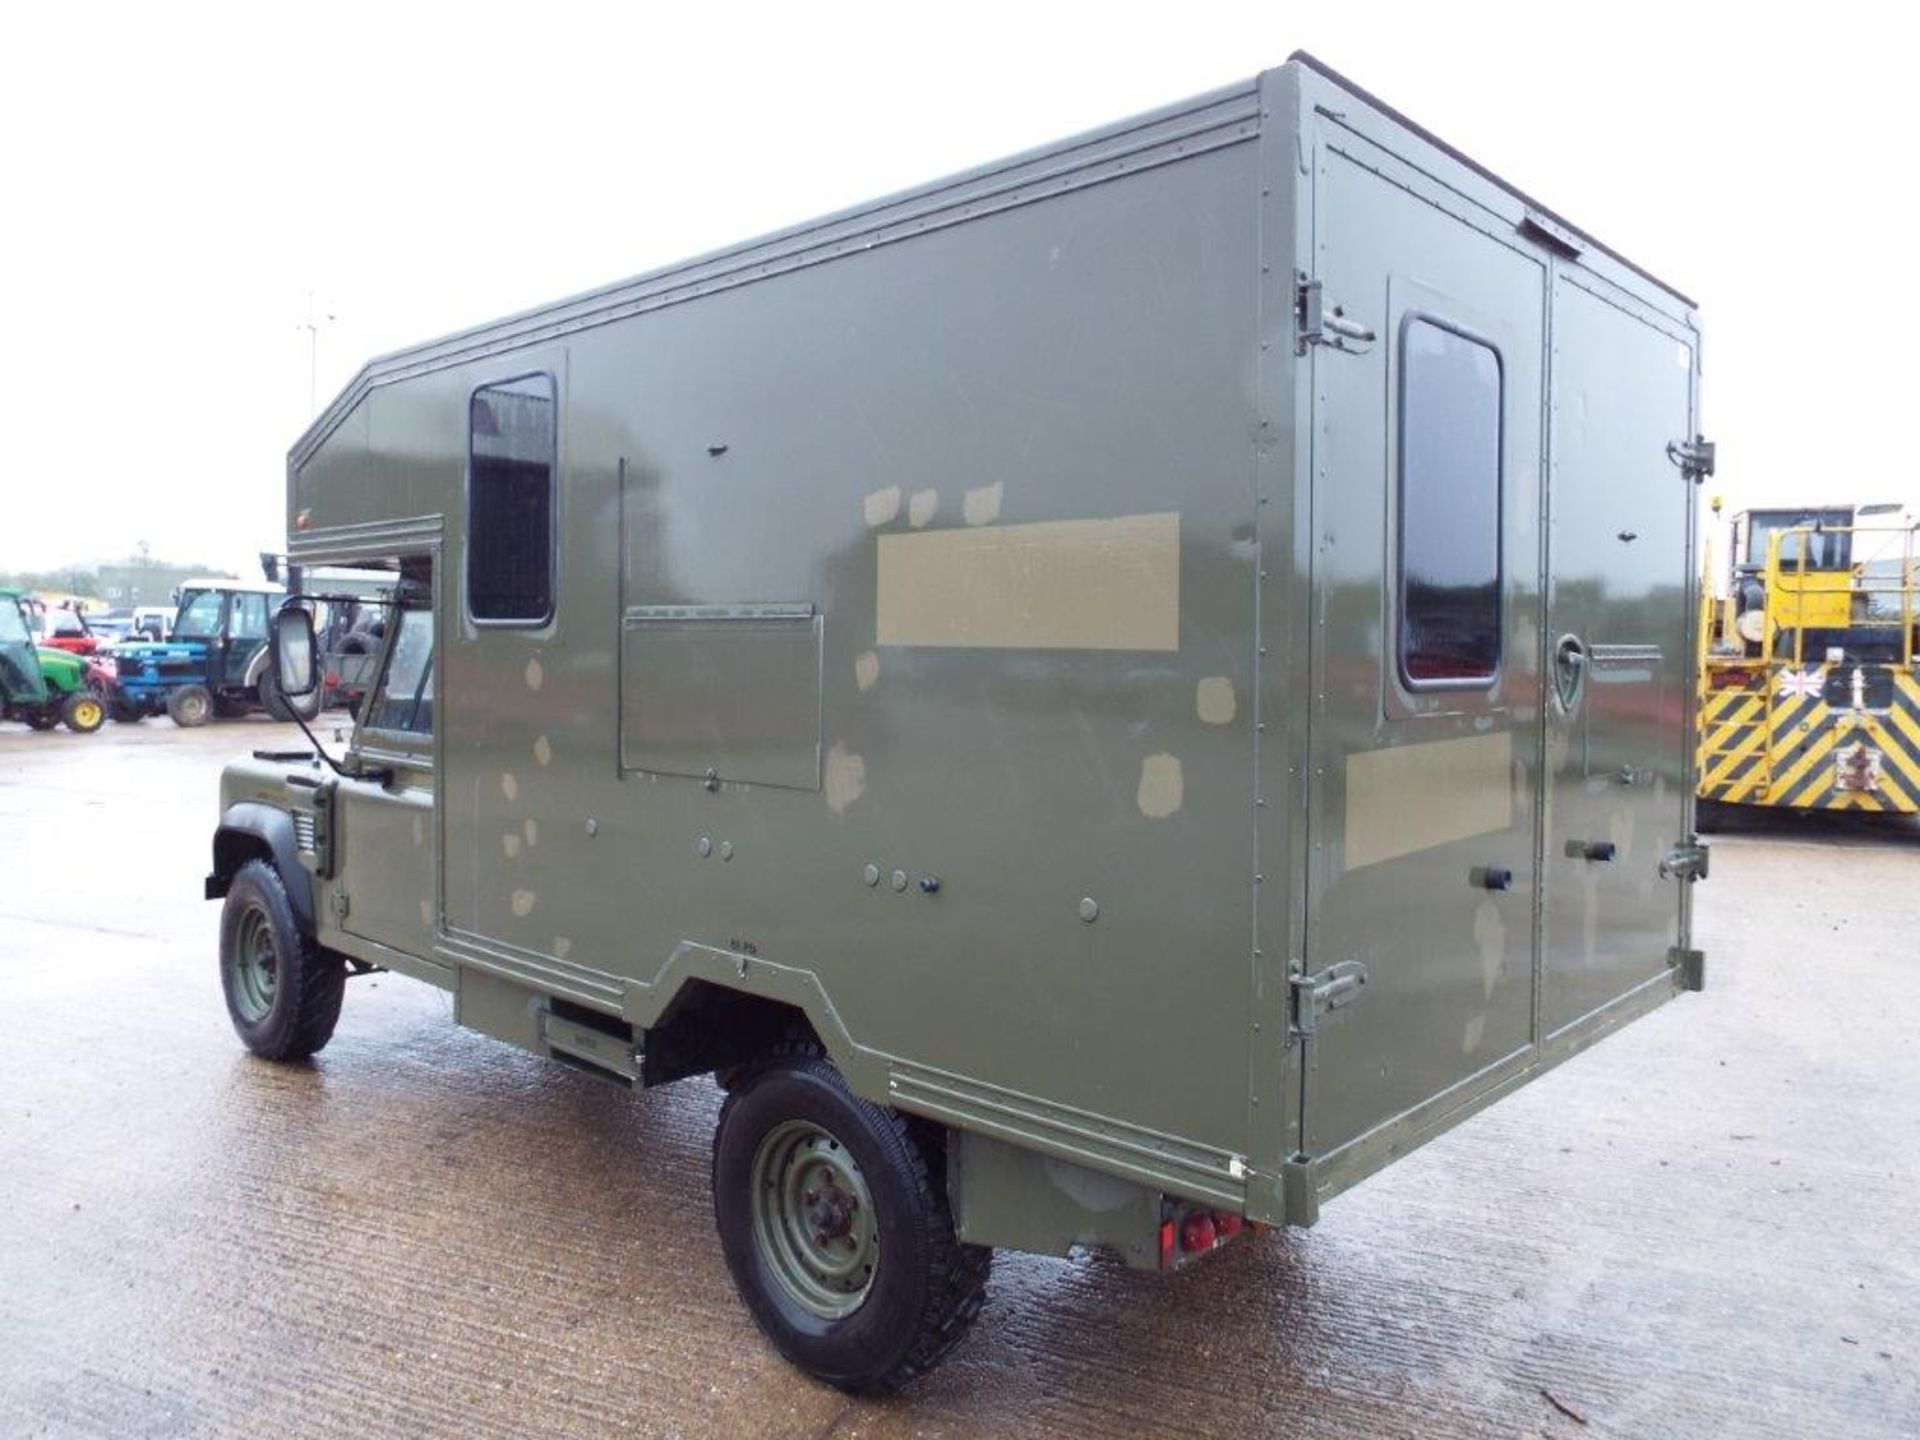 Military Specification LHD Land Rover Wolf 130 Ambulance - Image 5 of 23